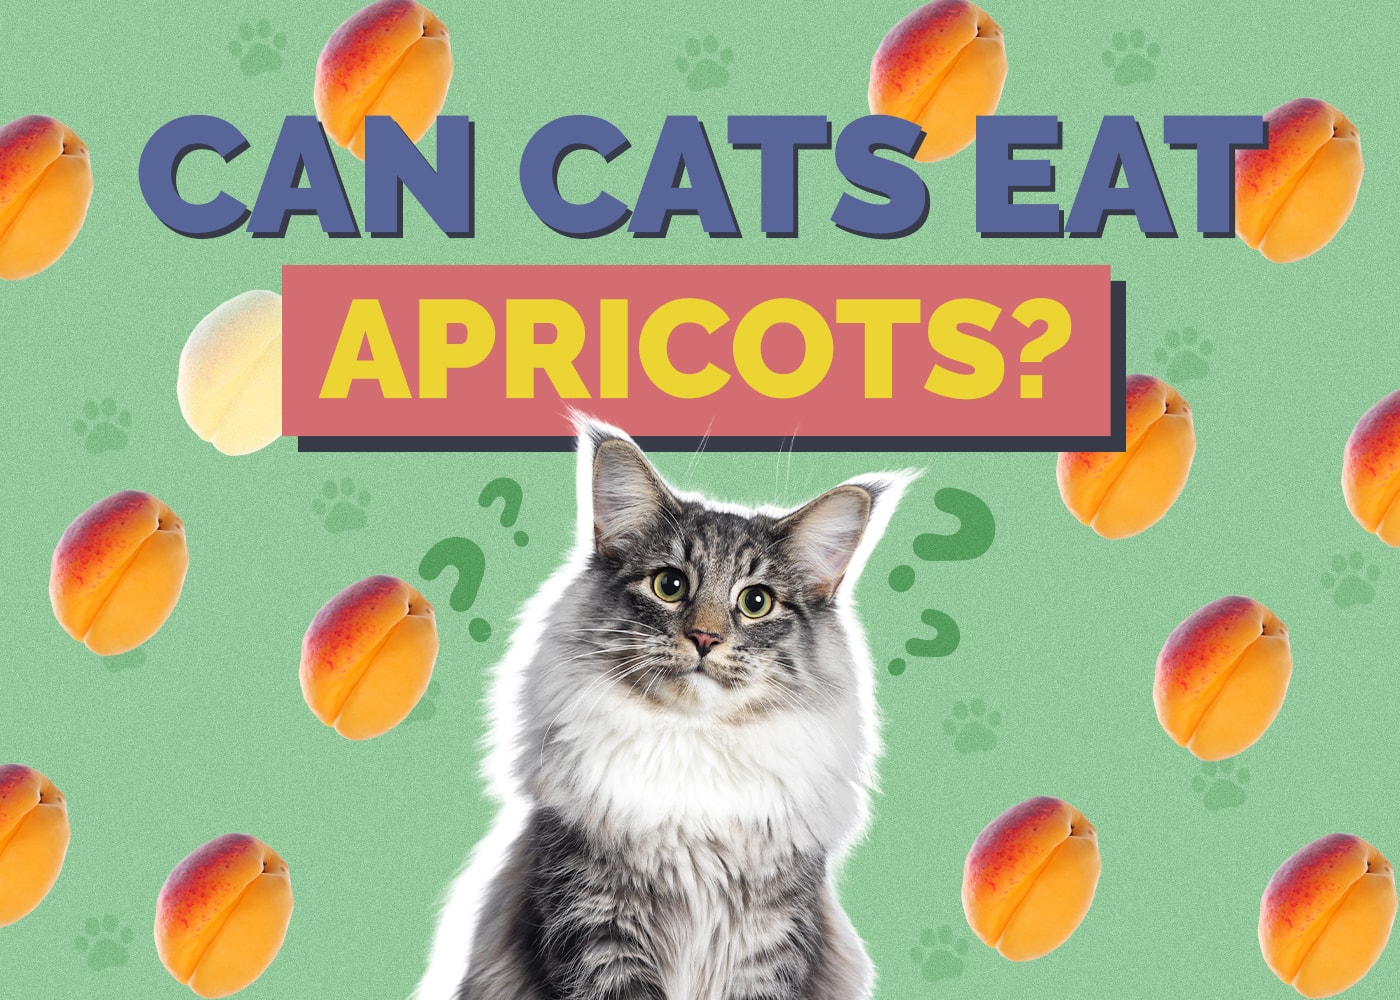 Can Cats Eat apricots